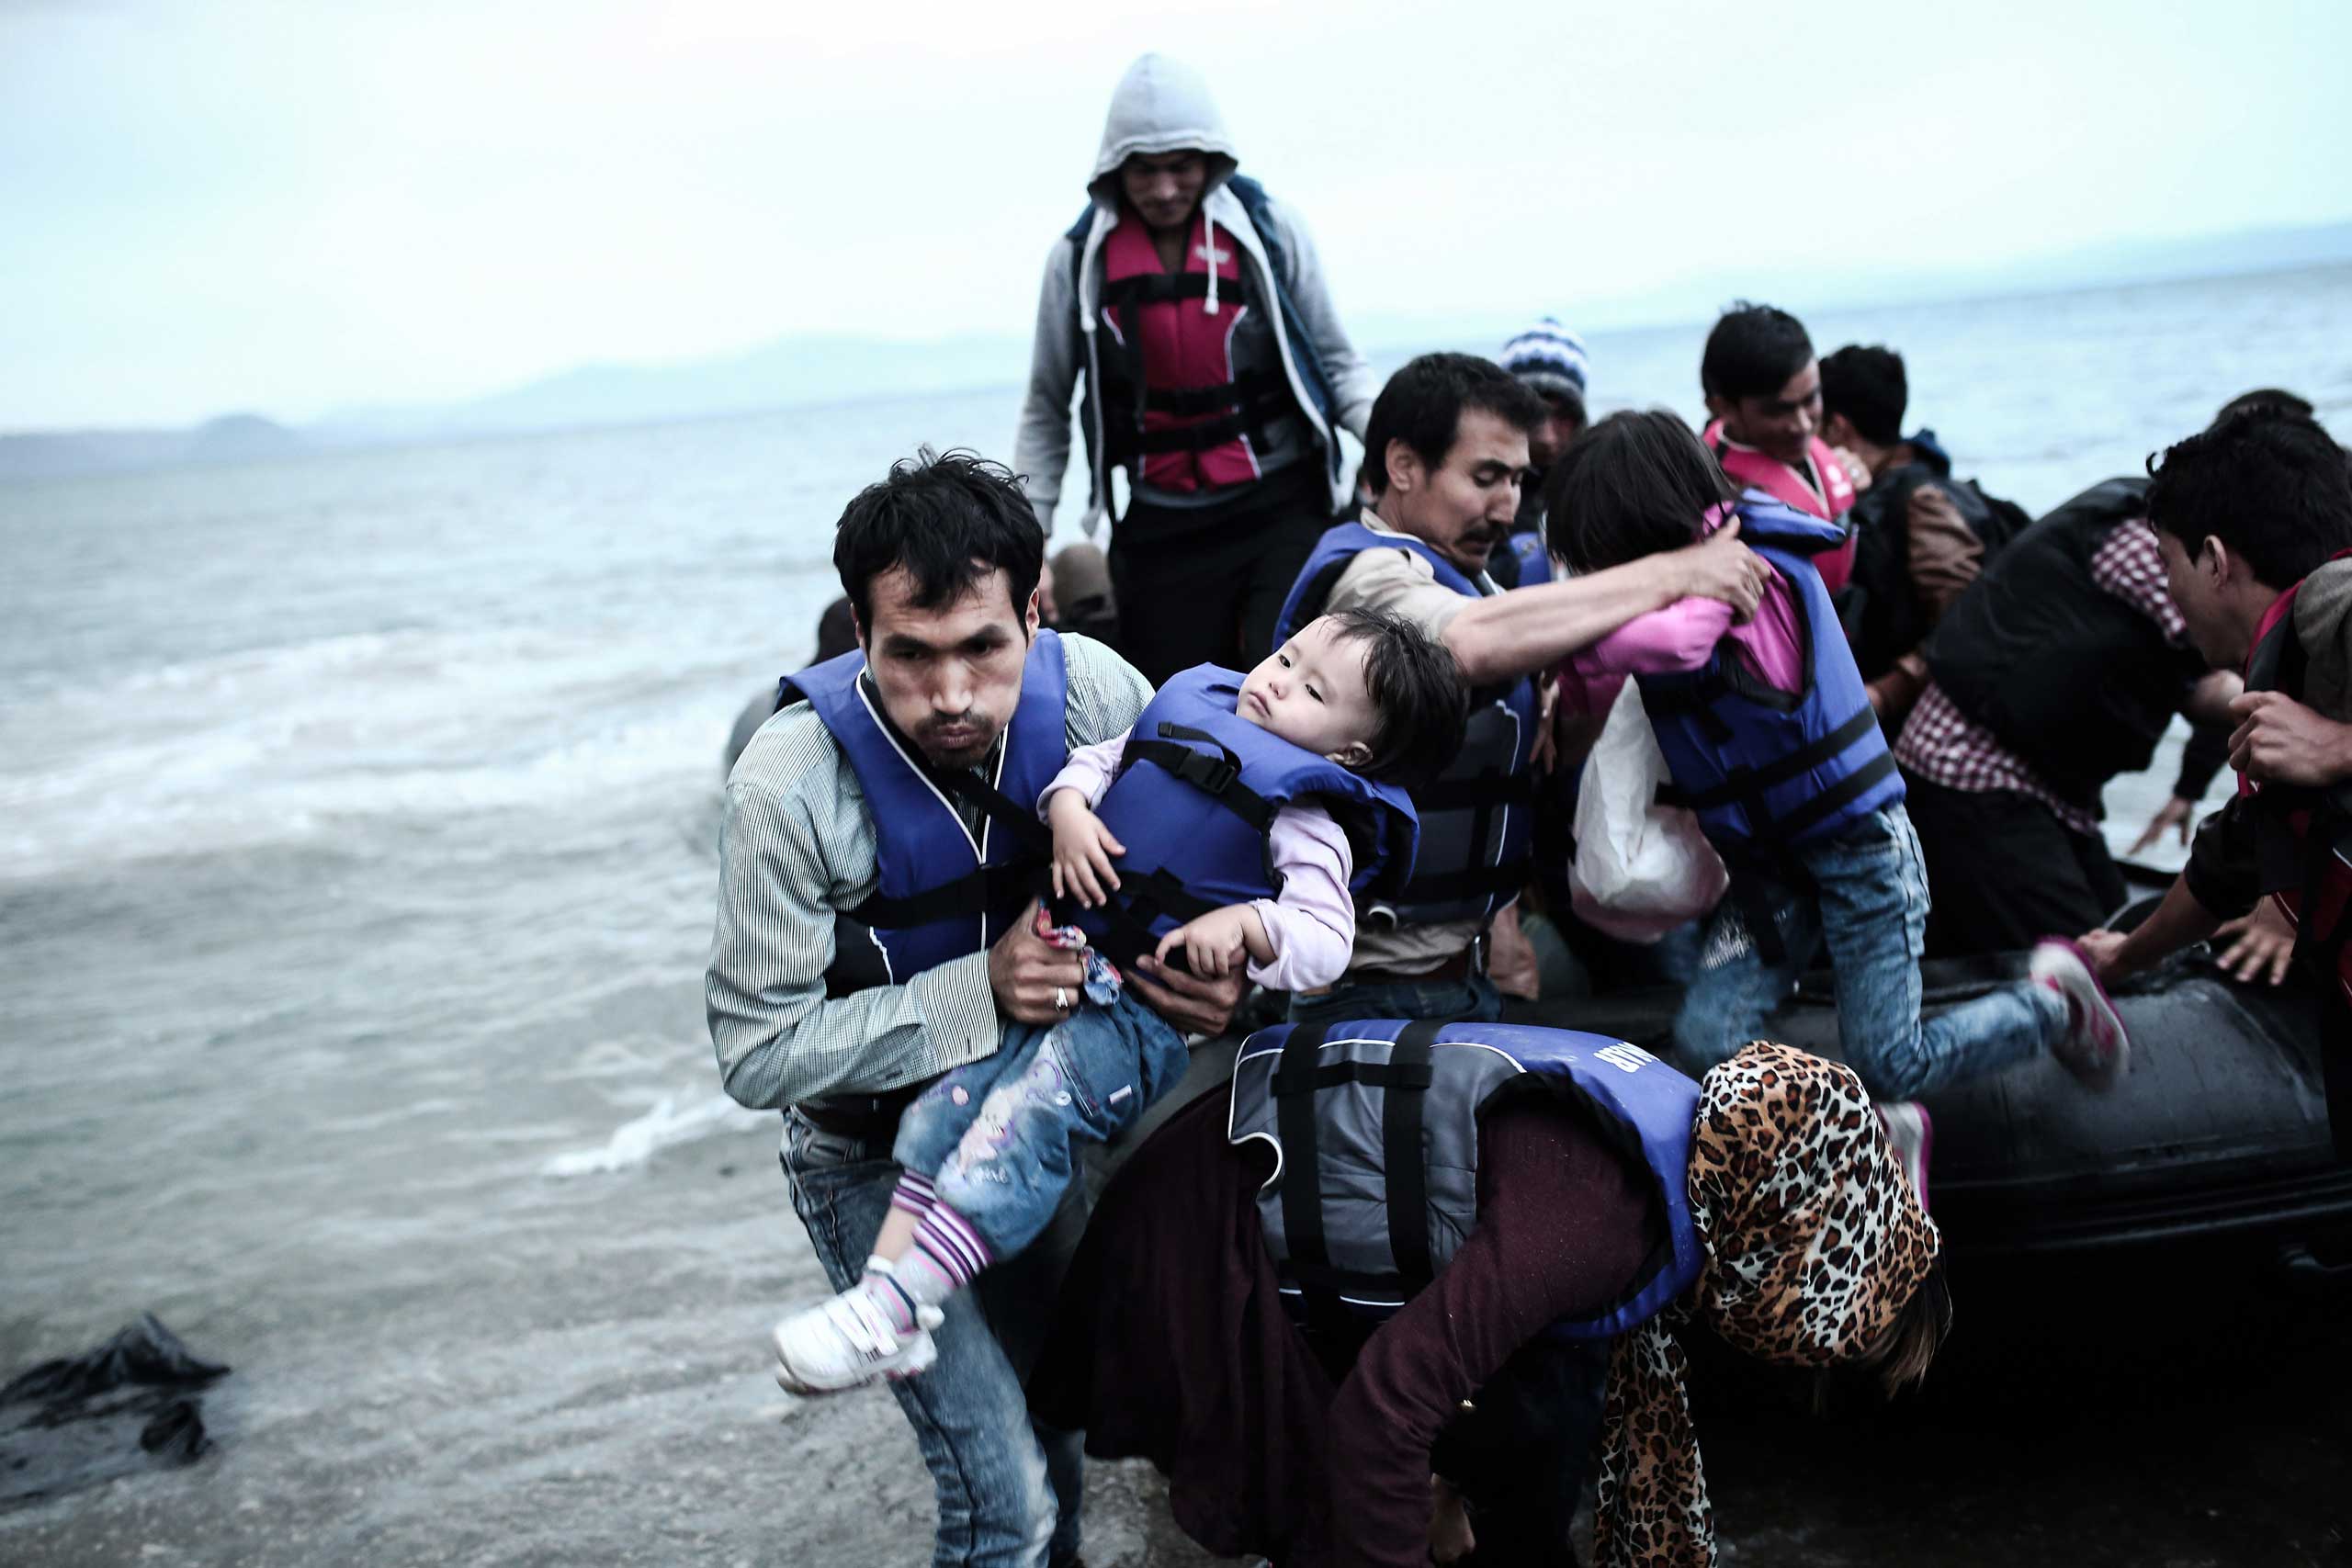 Afghan migrants arrive on the Greek island of Kos, after crossing a part of the Aegean Sea between Turkey and Greece, on May 27, 2015.